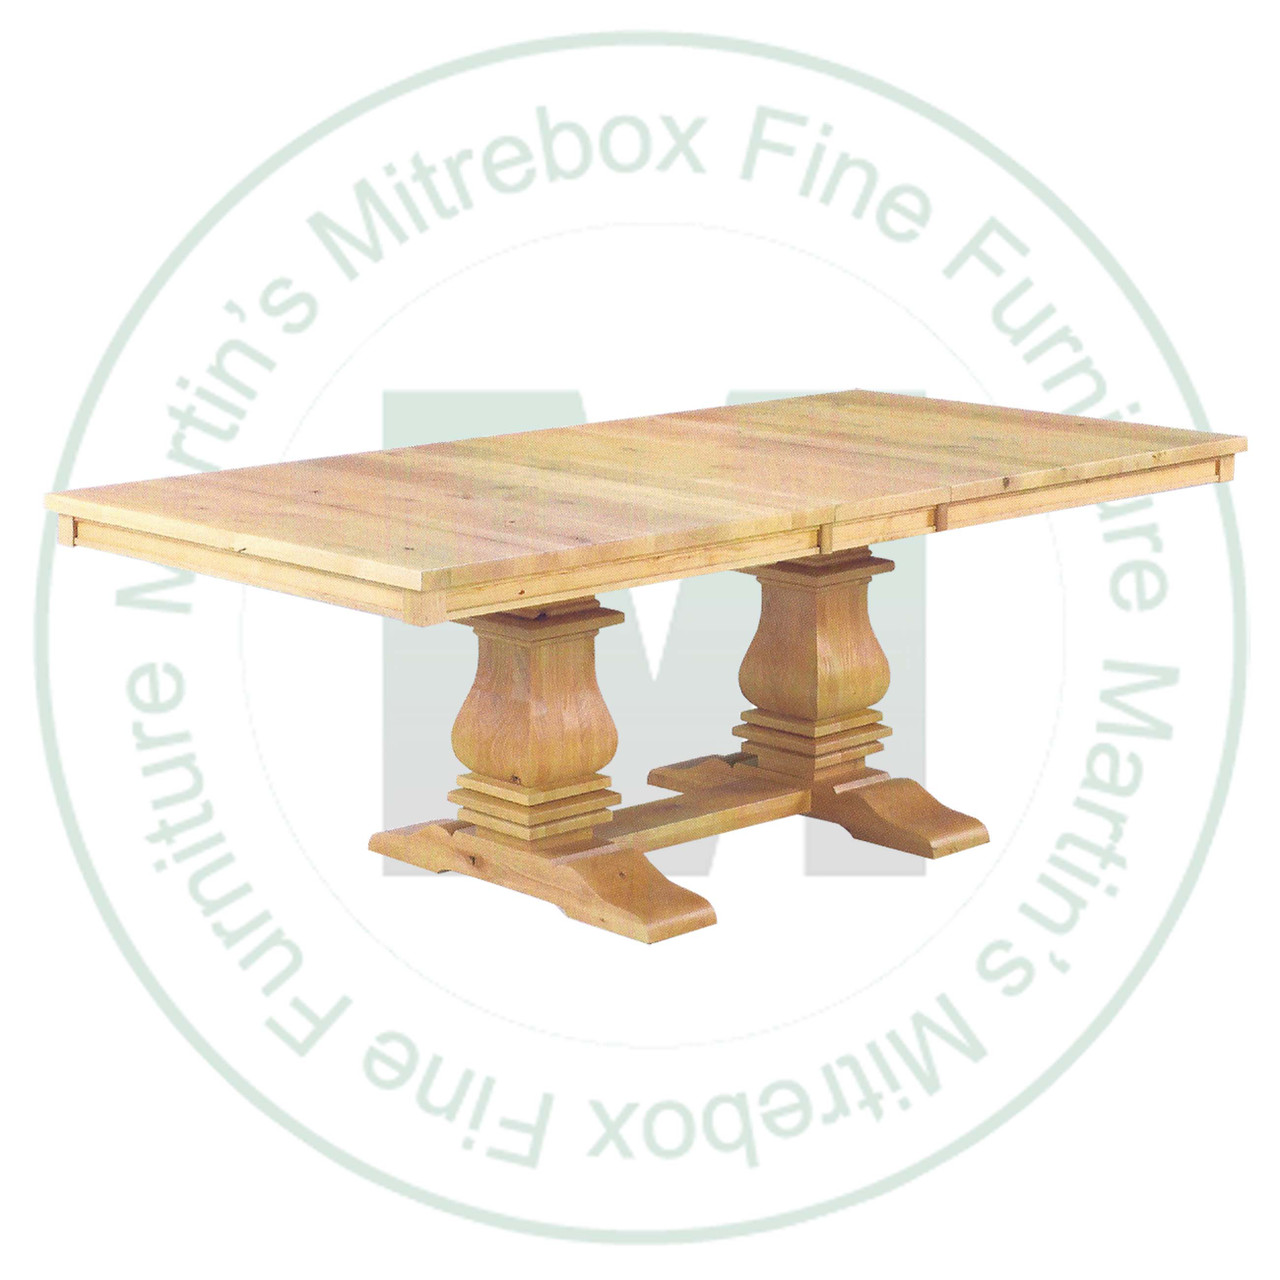 Maple Mediterranean Double Pedestal Table 48''D x 66''W x 30''H With 2 - 12'' Leaves. Table Has 1.25'' Thick Top